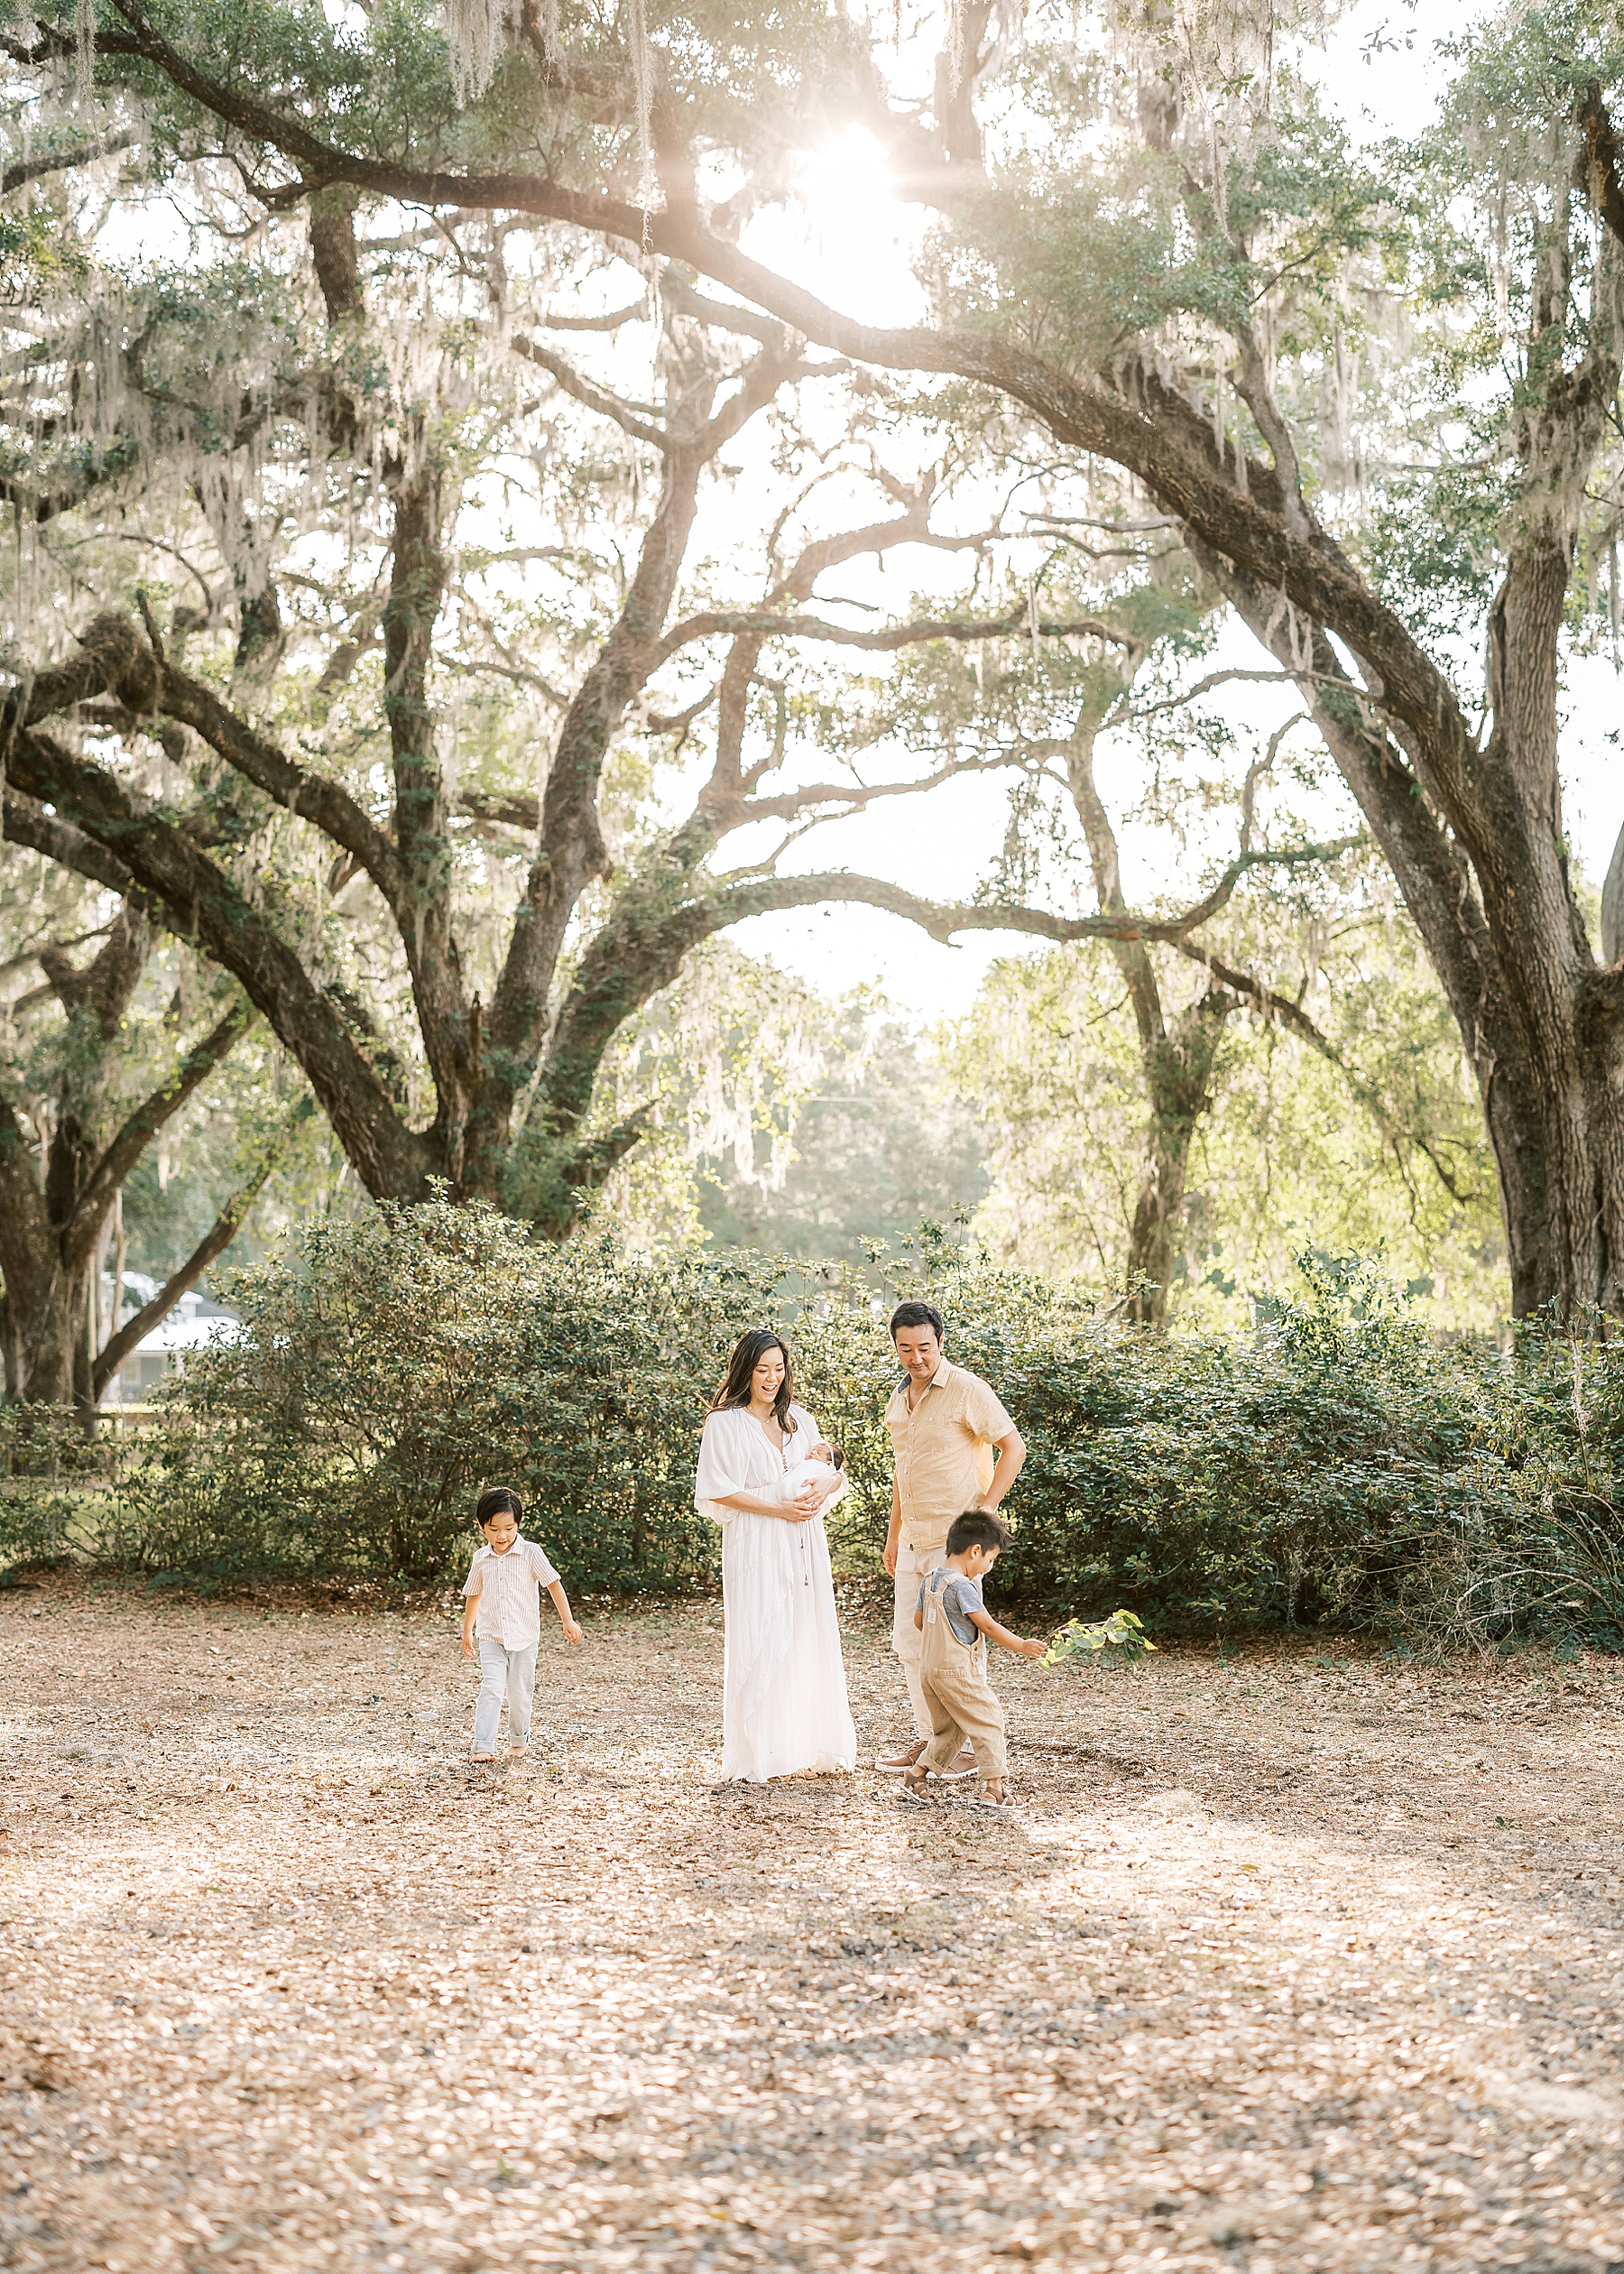 light and airy outdoor newborn lifestyle image of family playing under an oak tree in Gainesville, Florida